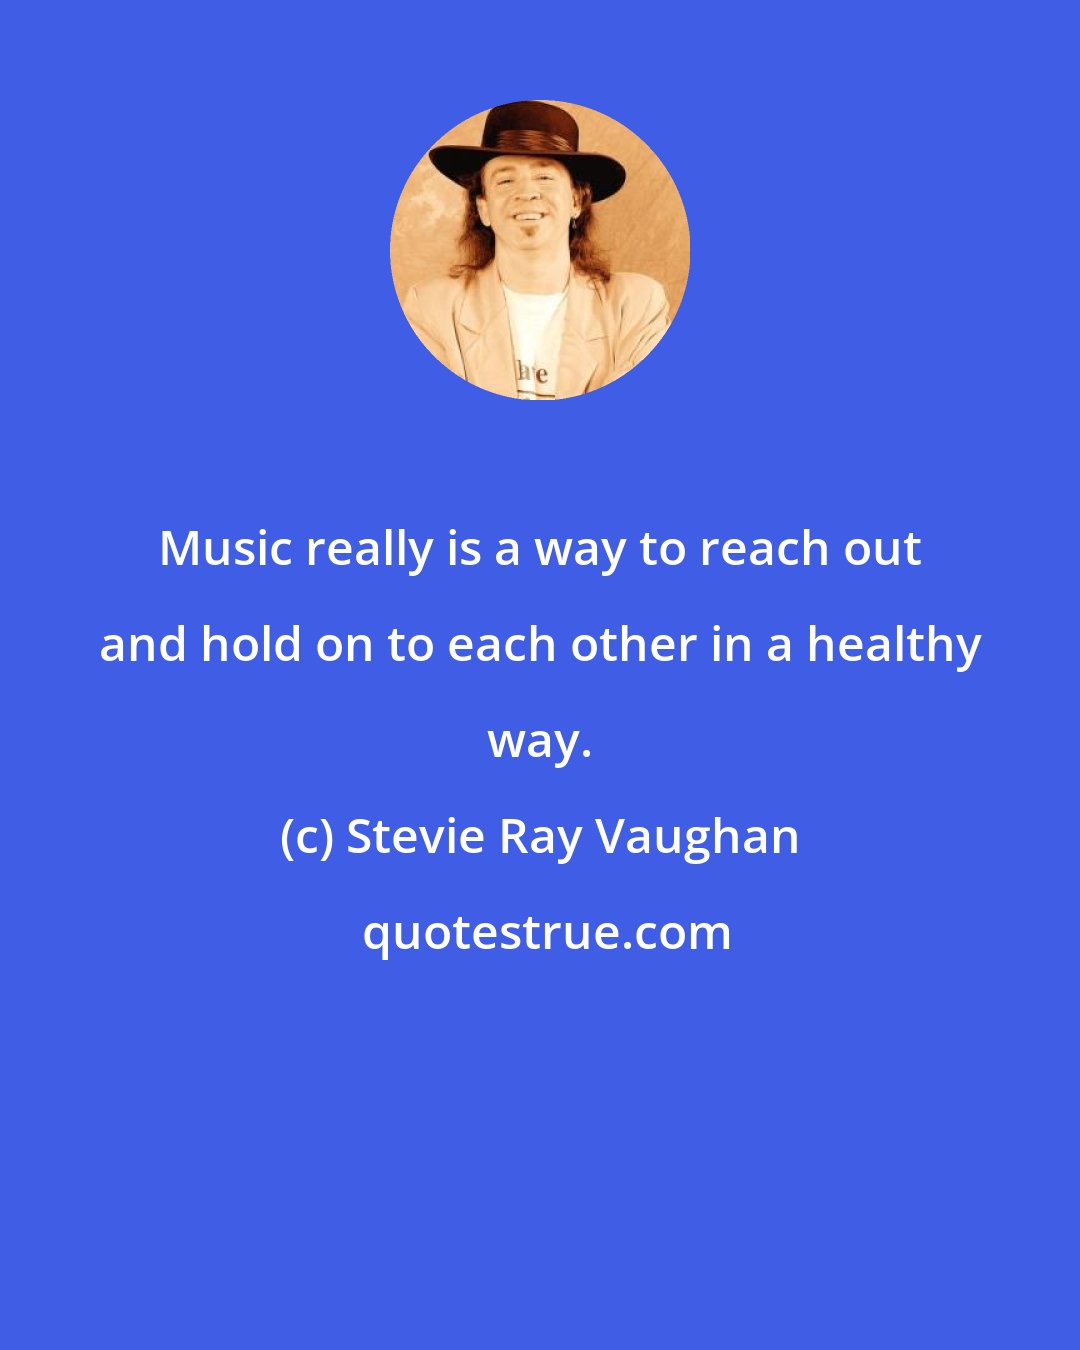 Stevie Ray Vaughan: Music really is a way to reach out and hold on to each other in a healthy way.